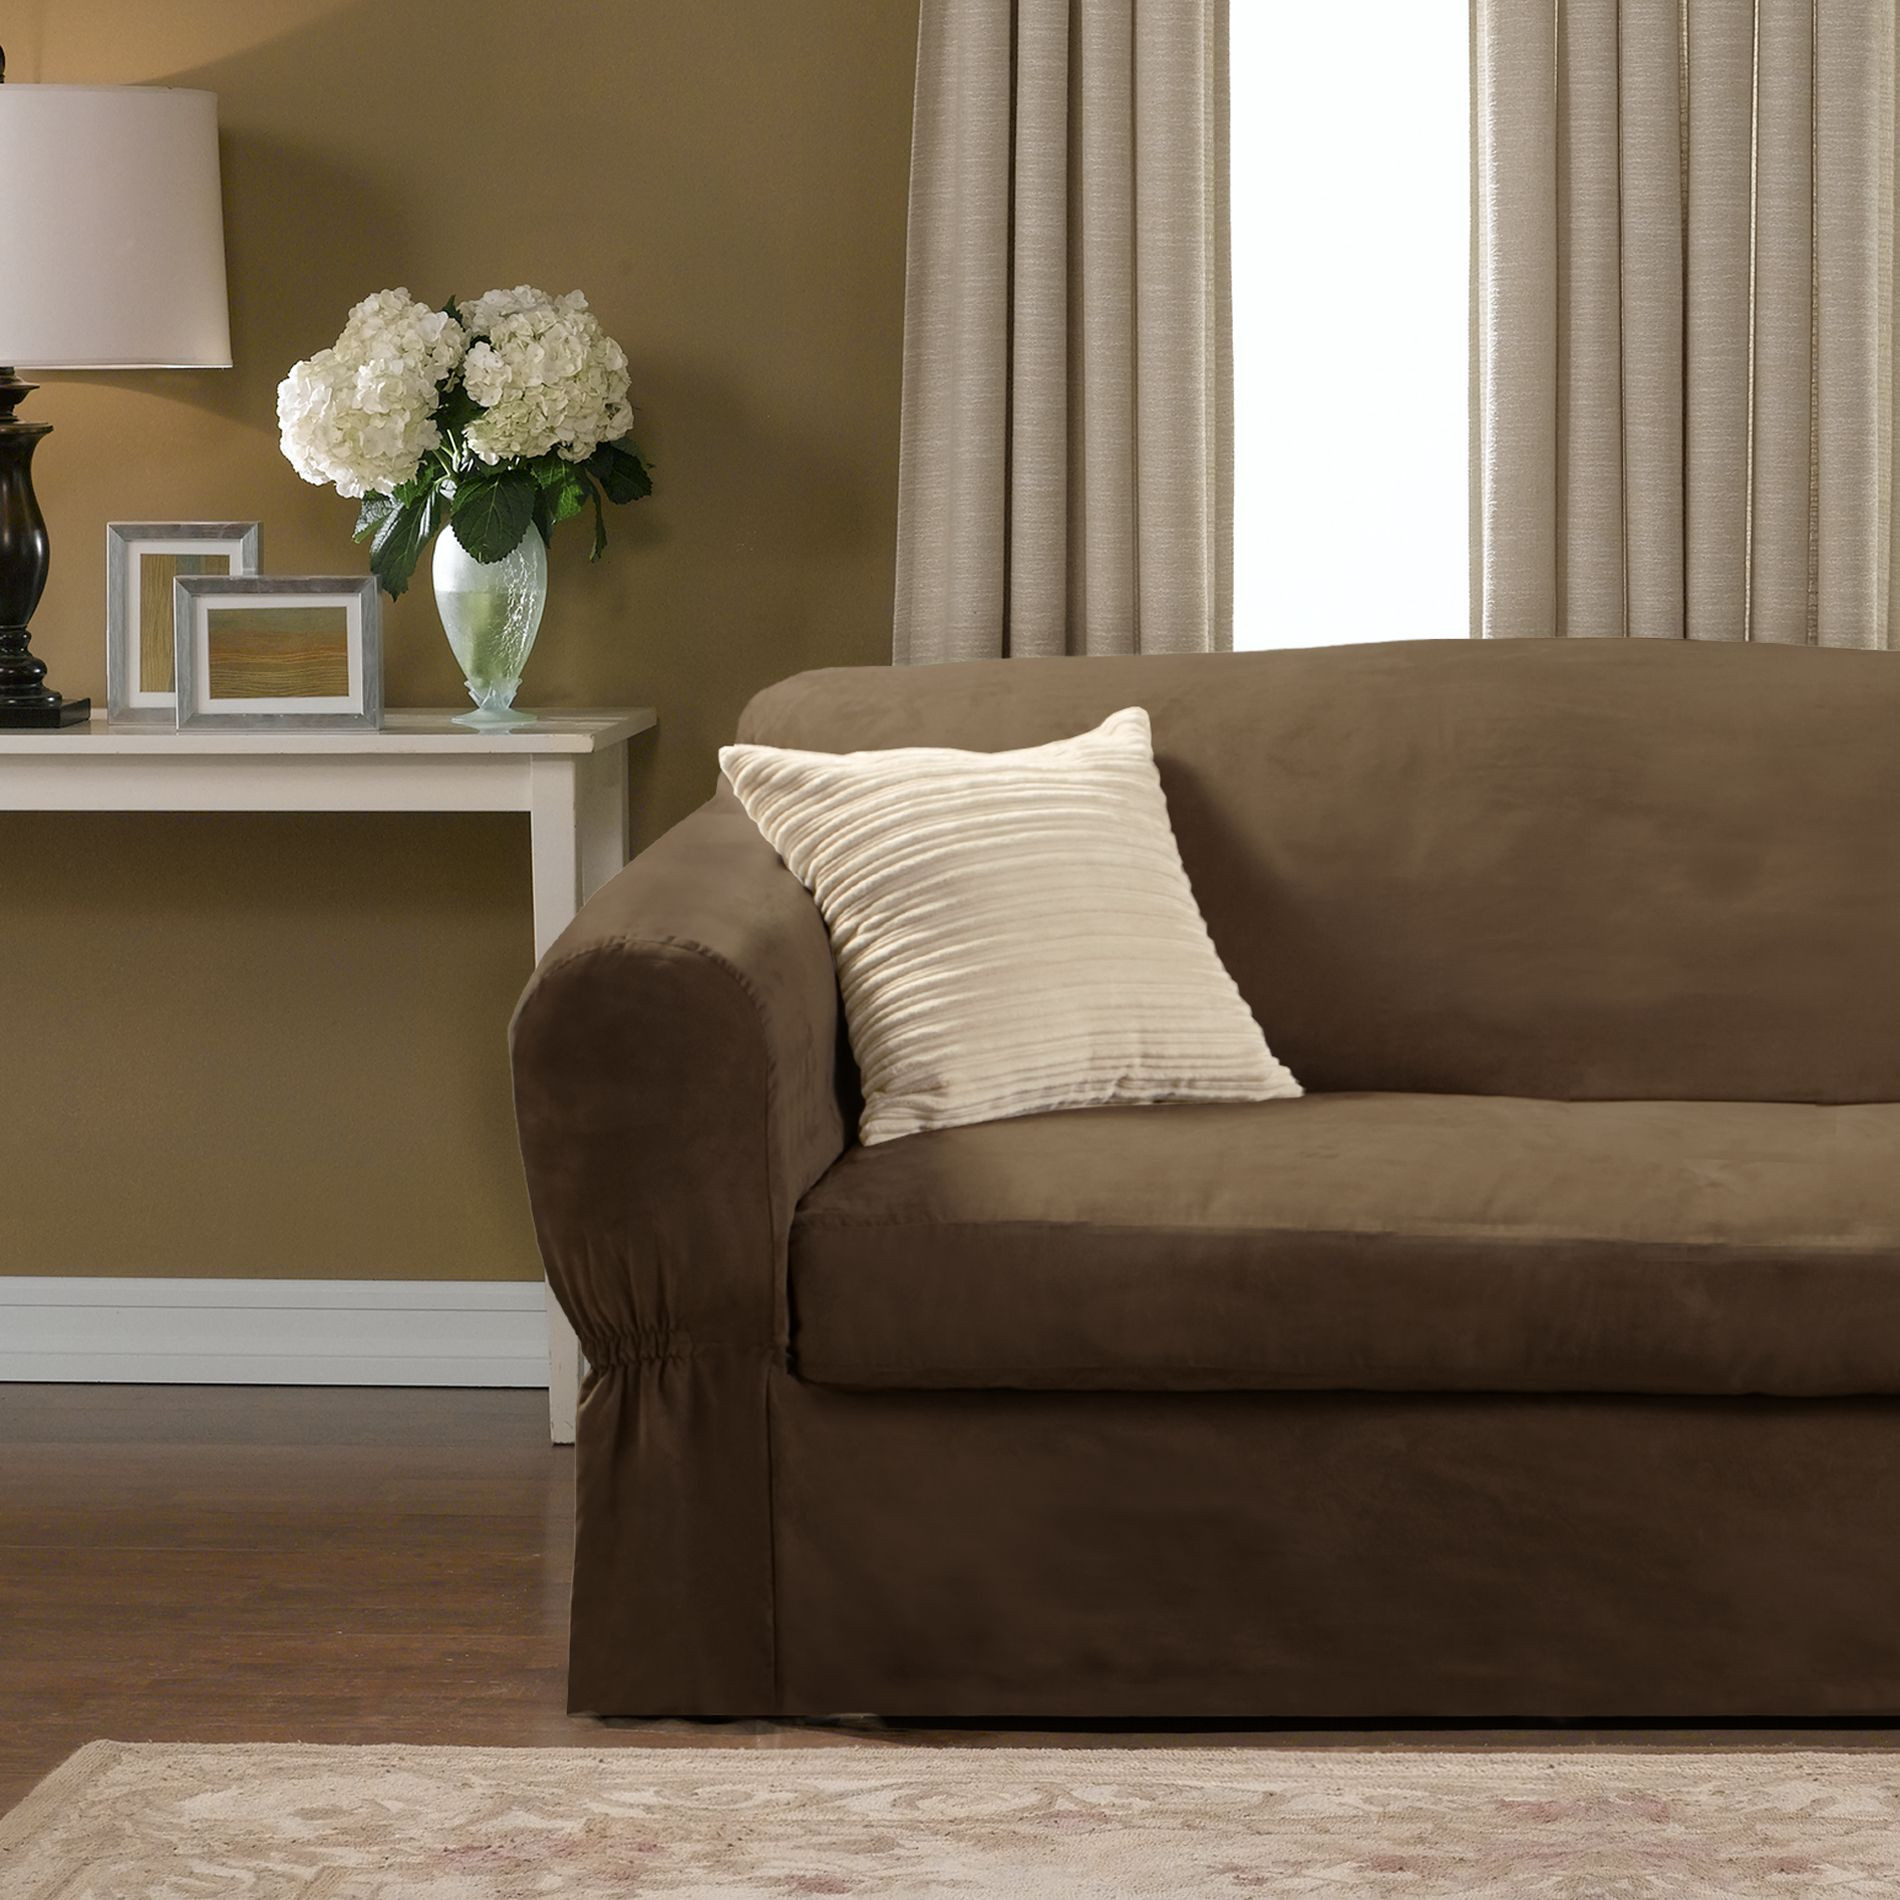 Living Room Chair Covers
 The Living Room Collection Suede 2 Piece Sofa Slipcover